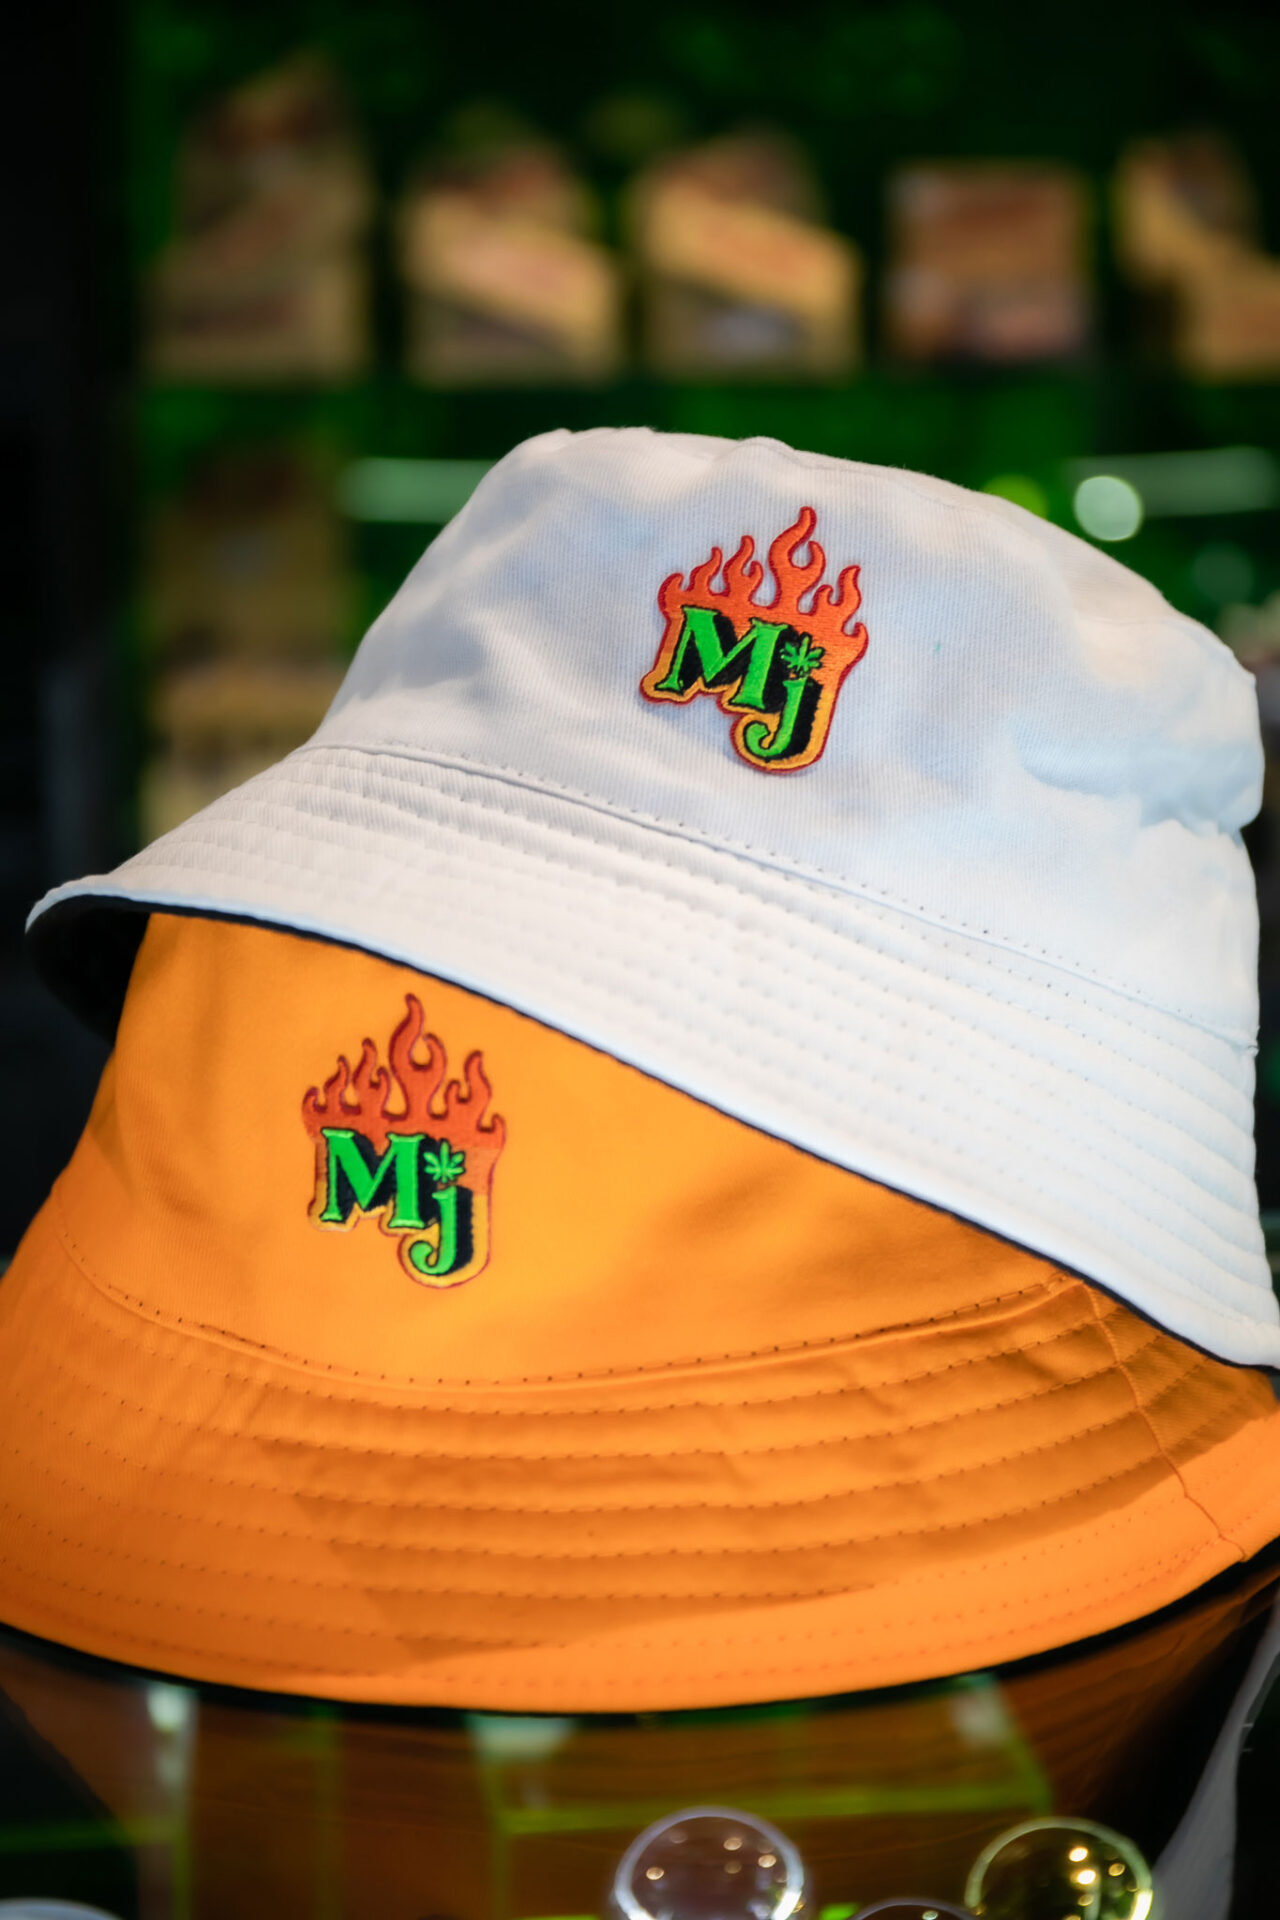 Mary jane cannabis store patpong sells hats